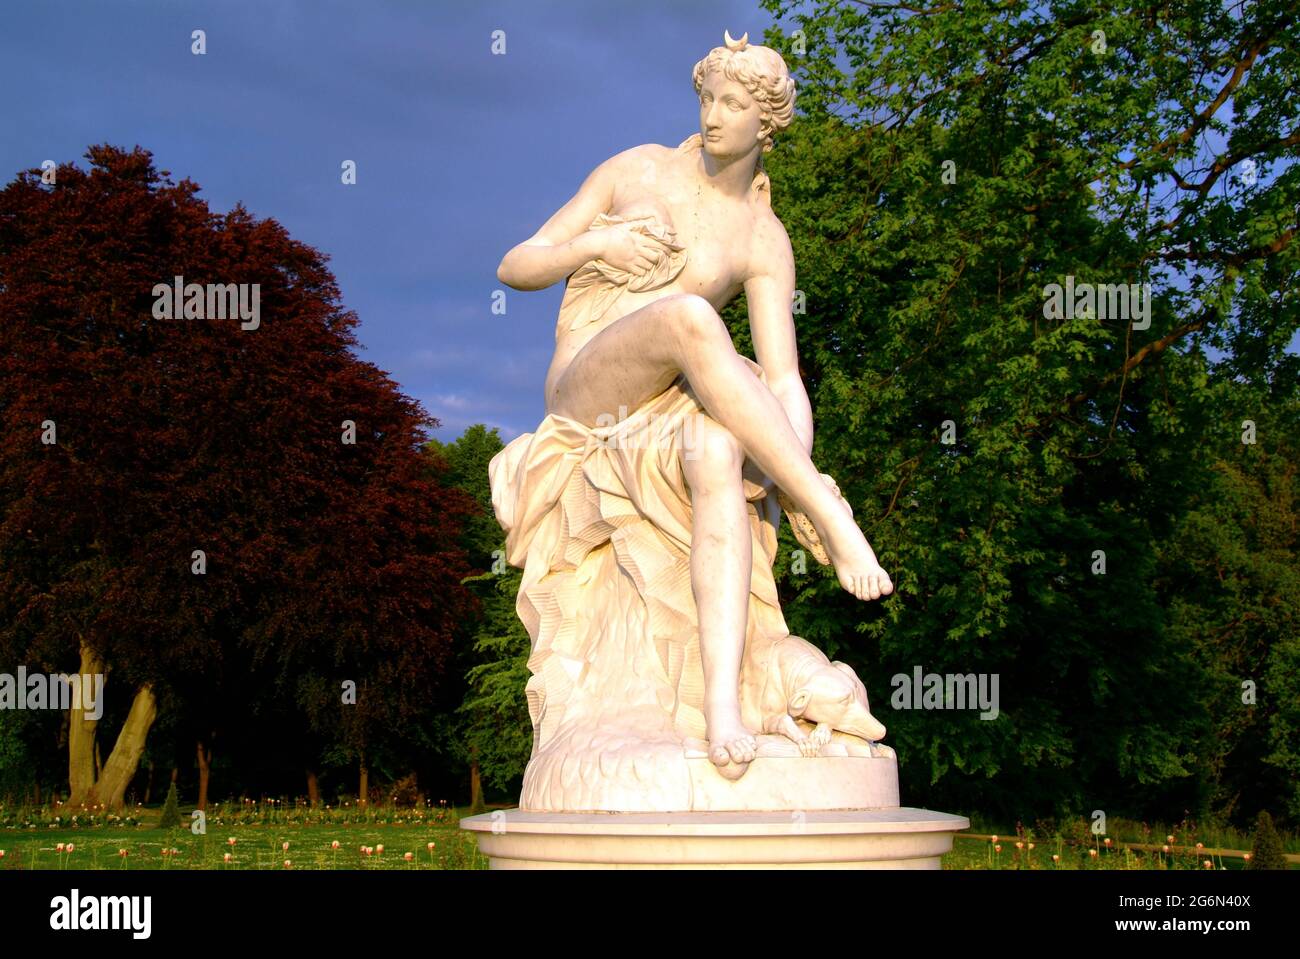 Statue of Diana in the Park Sansouci, Potsdam Stock Photo